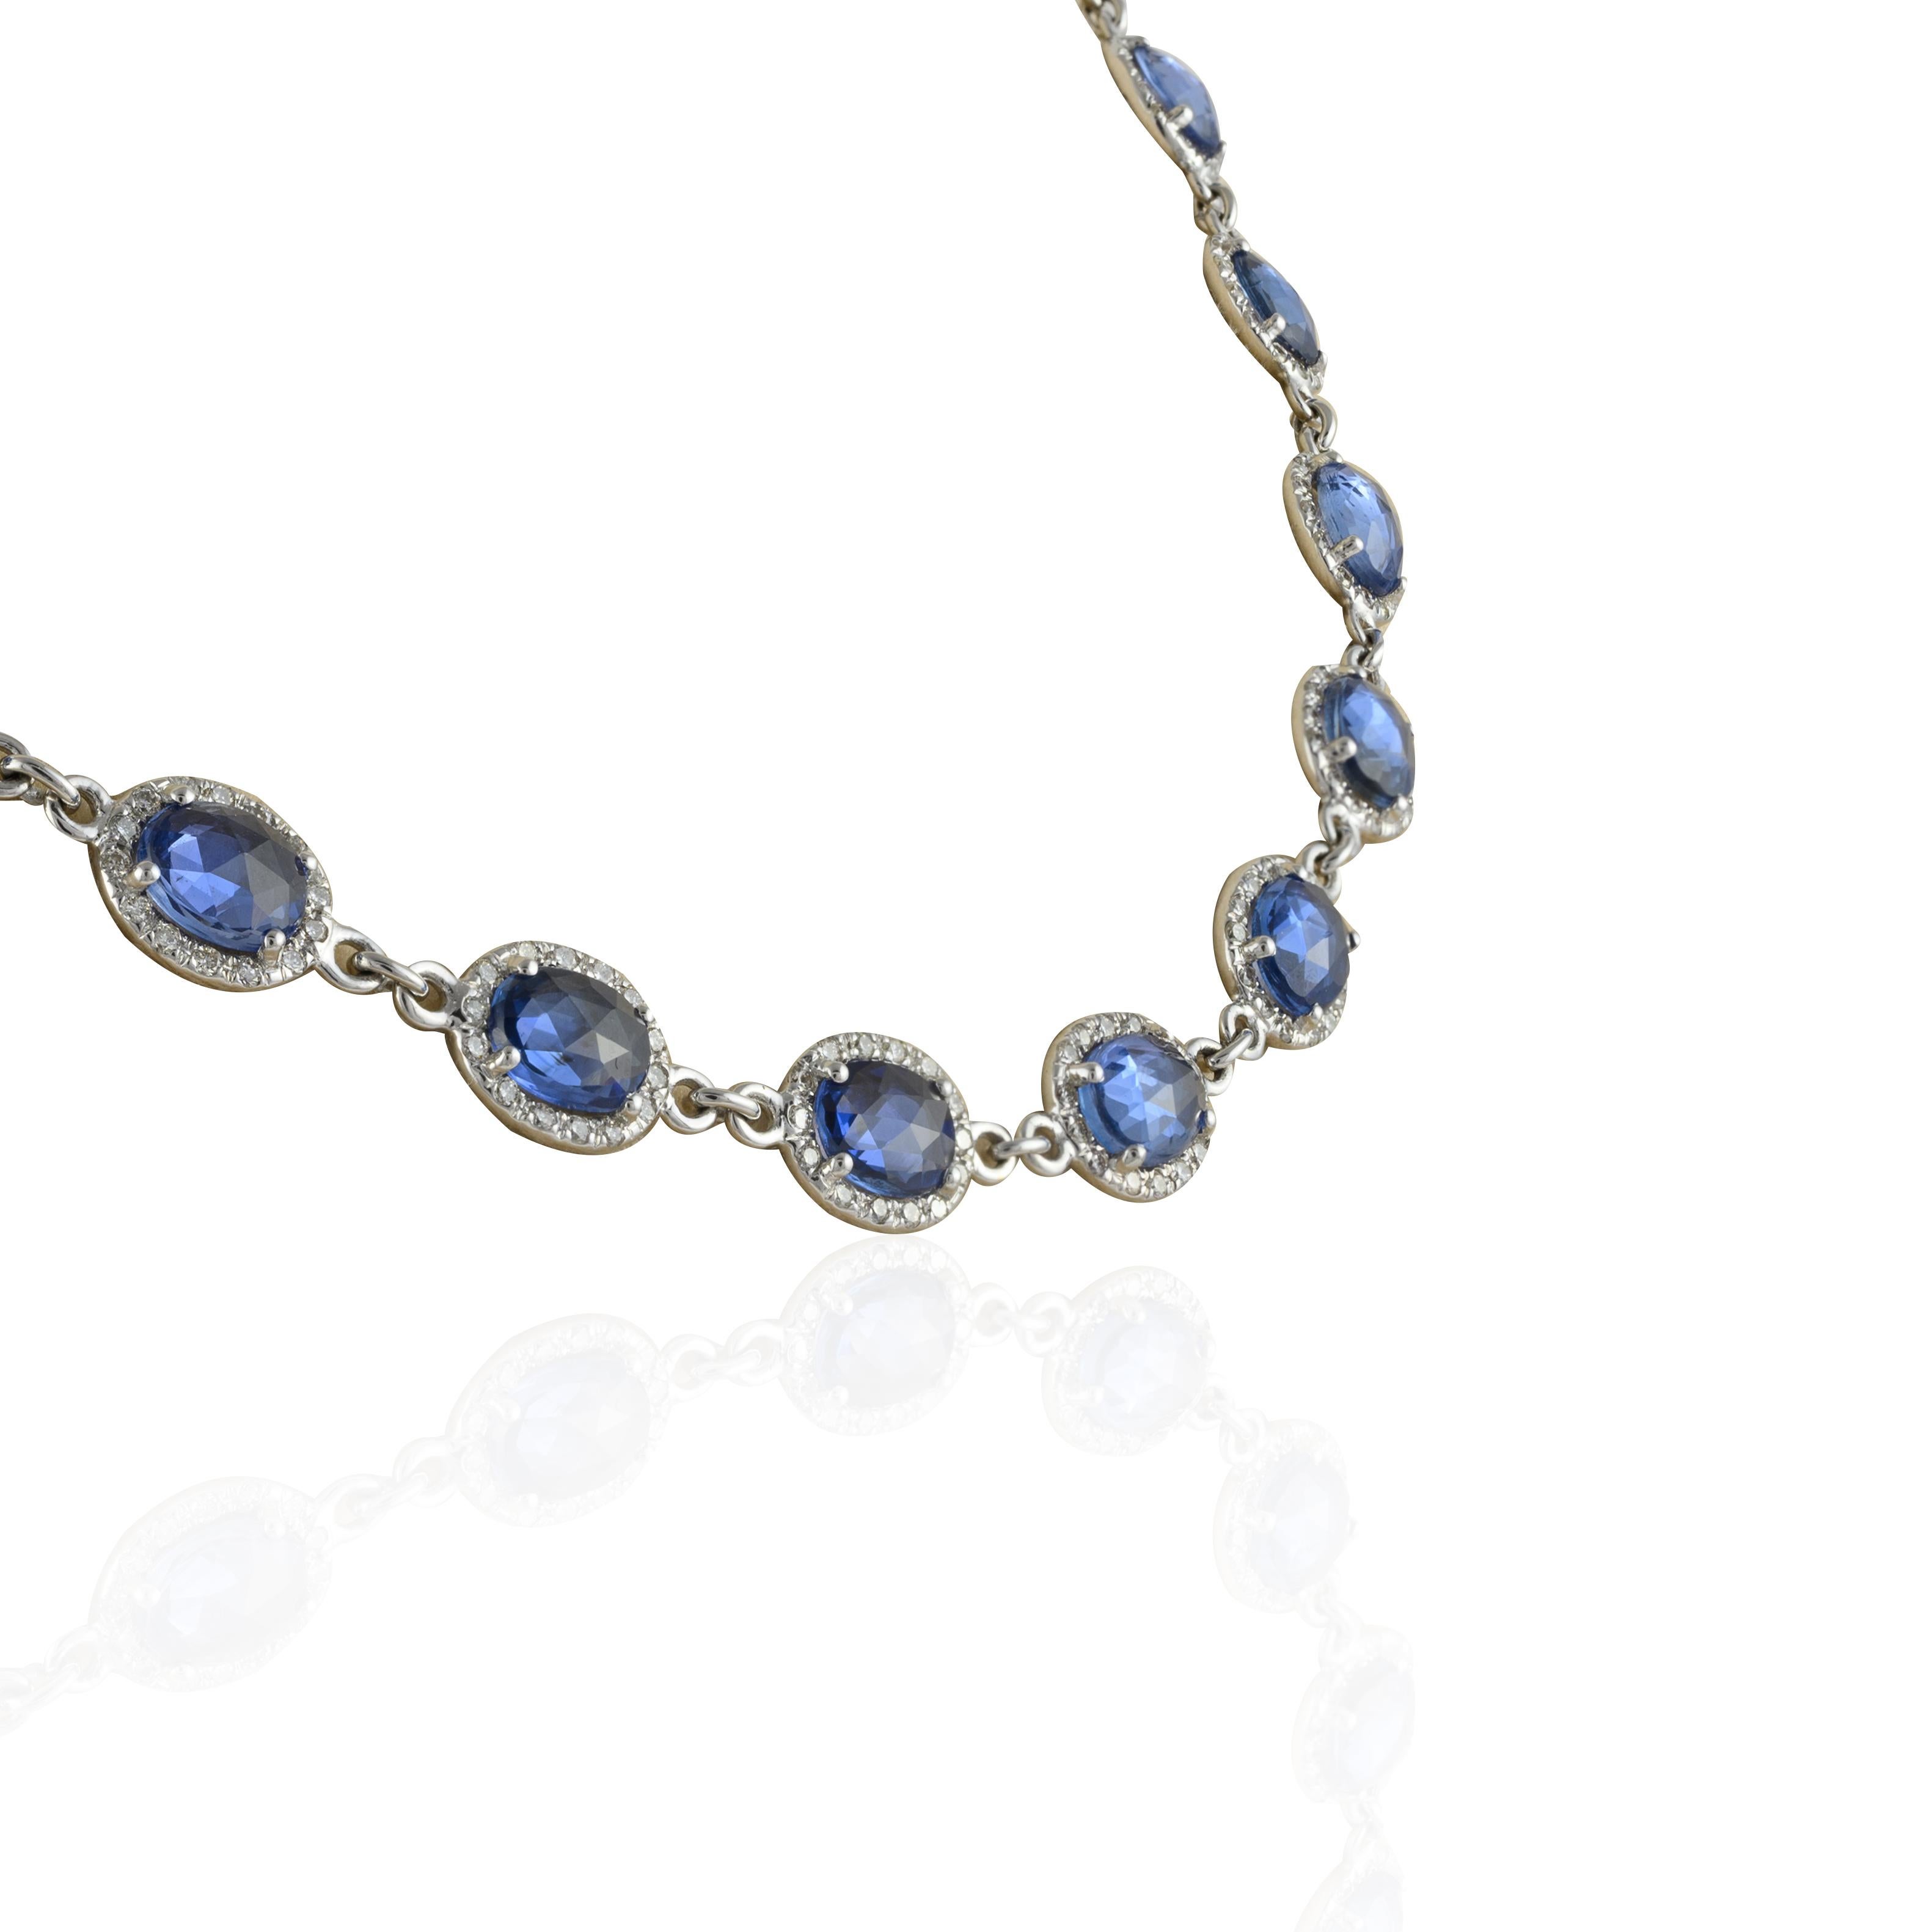 Taille ovale Certified 15.51 CTW Sapphire and Halo Diamond Necklace Gift 18k White Gold (en anglais seulement) en vente